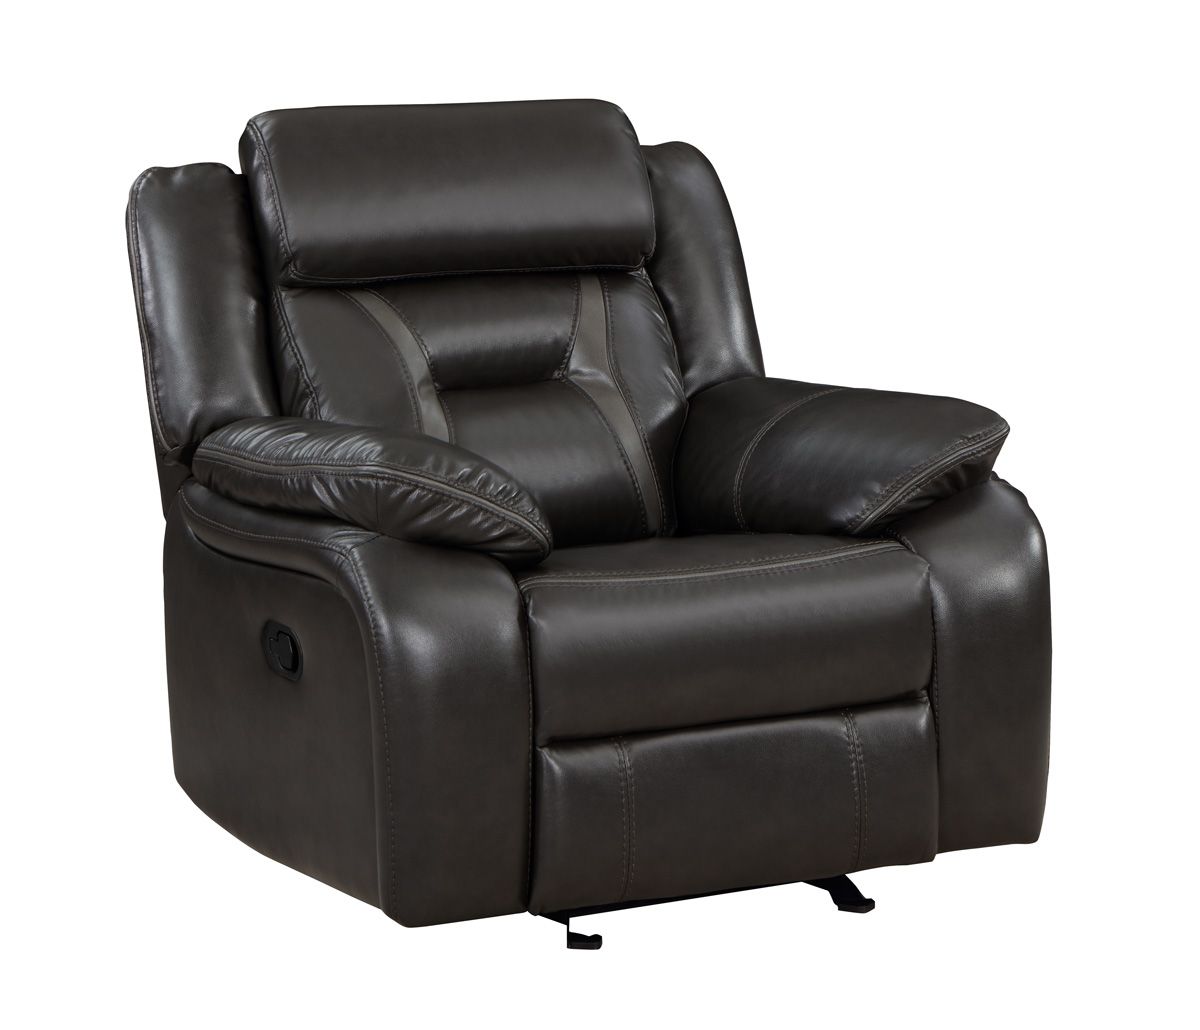 Aviator Grey Leather Recliner Chair